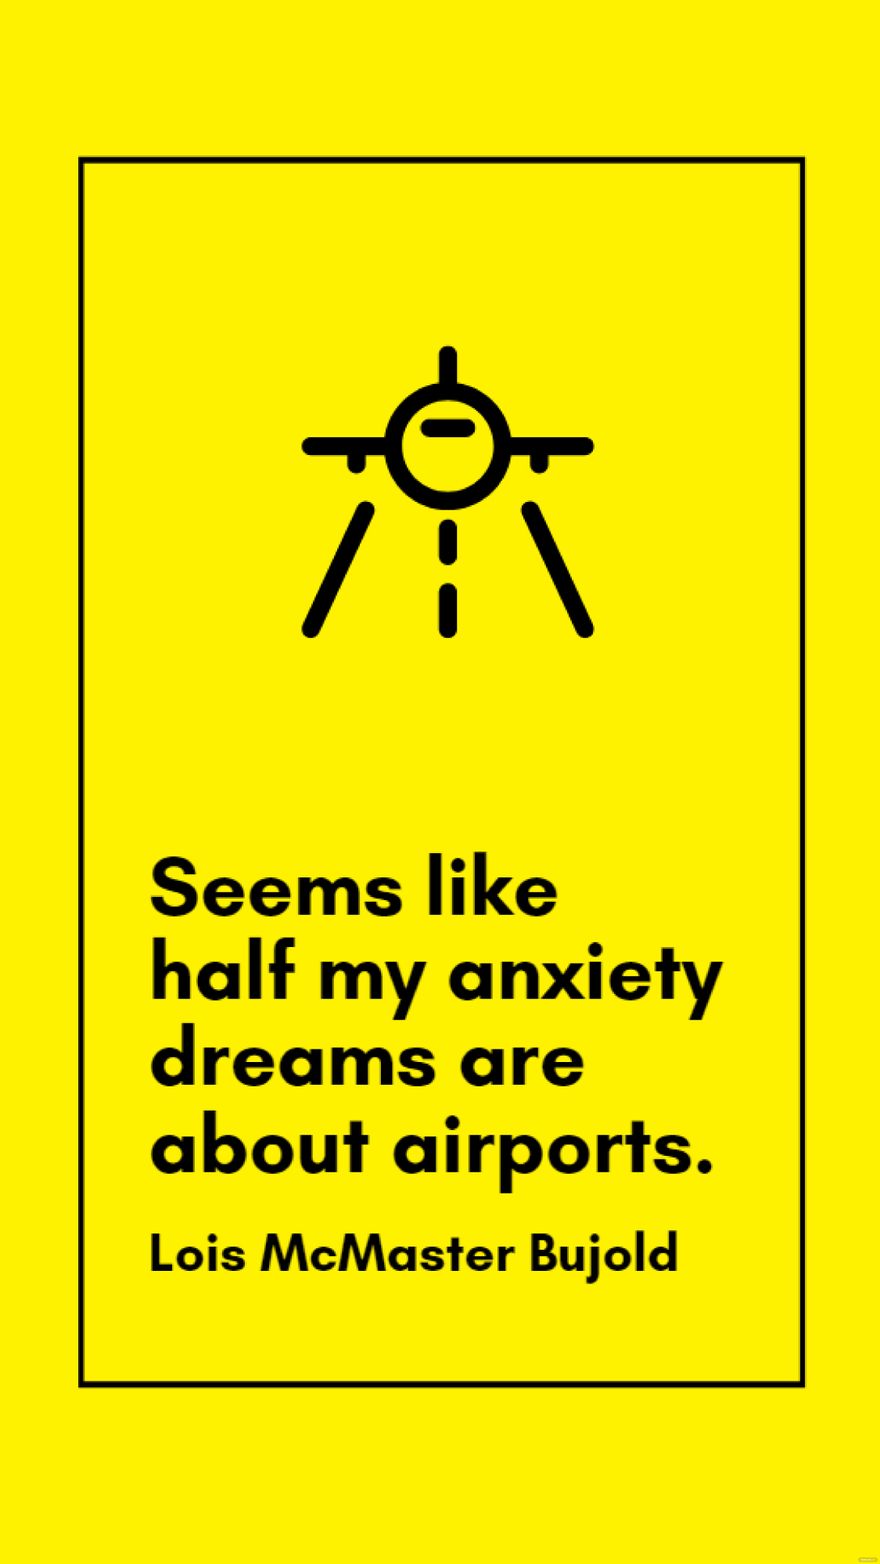 Lois McMaster Bujold - Seems like half my anxiety dreams are about airports. in JPG